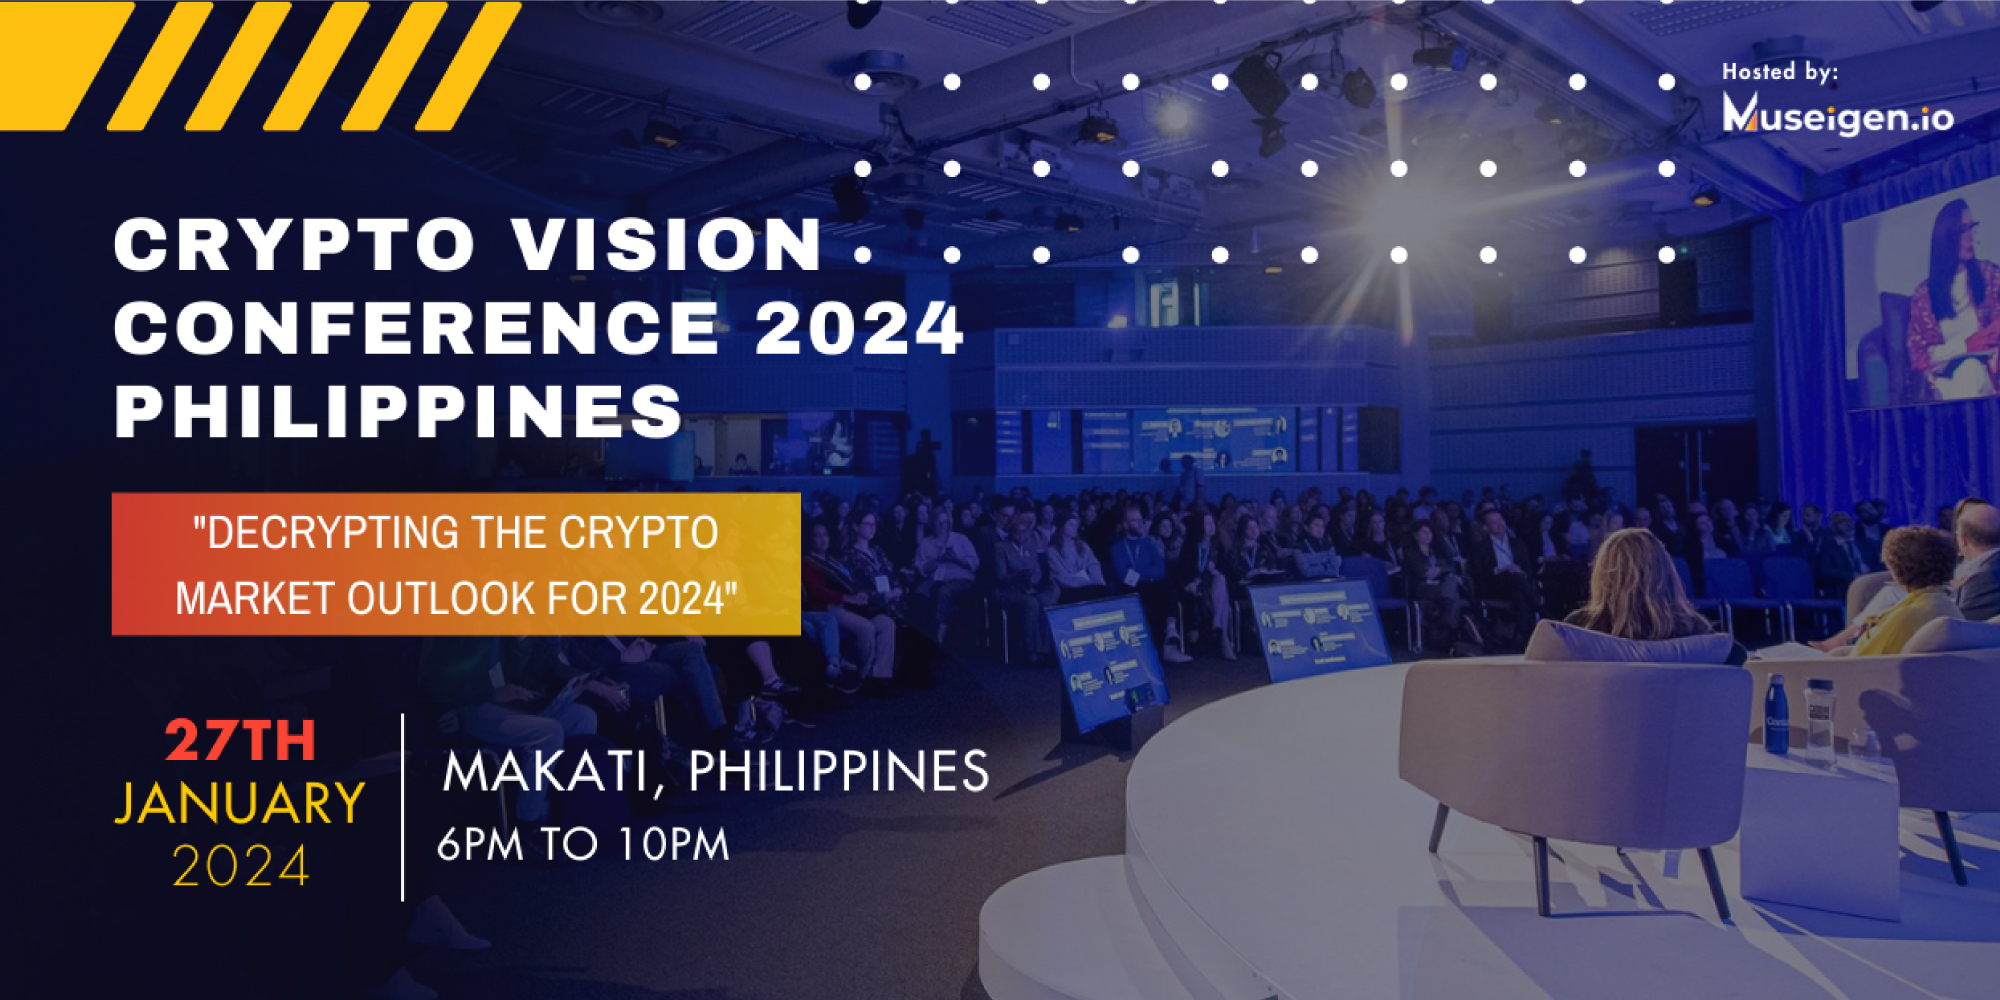 Crypto Vision Conference 2024 Philippines "Decrypting the Crypto